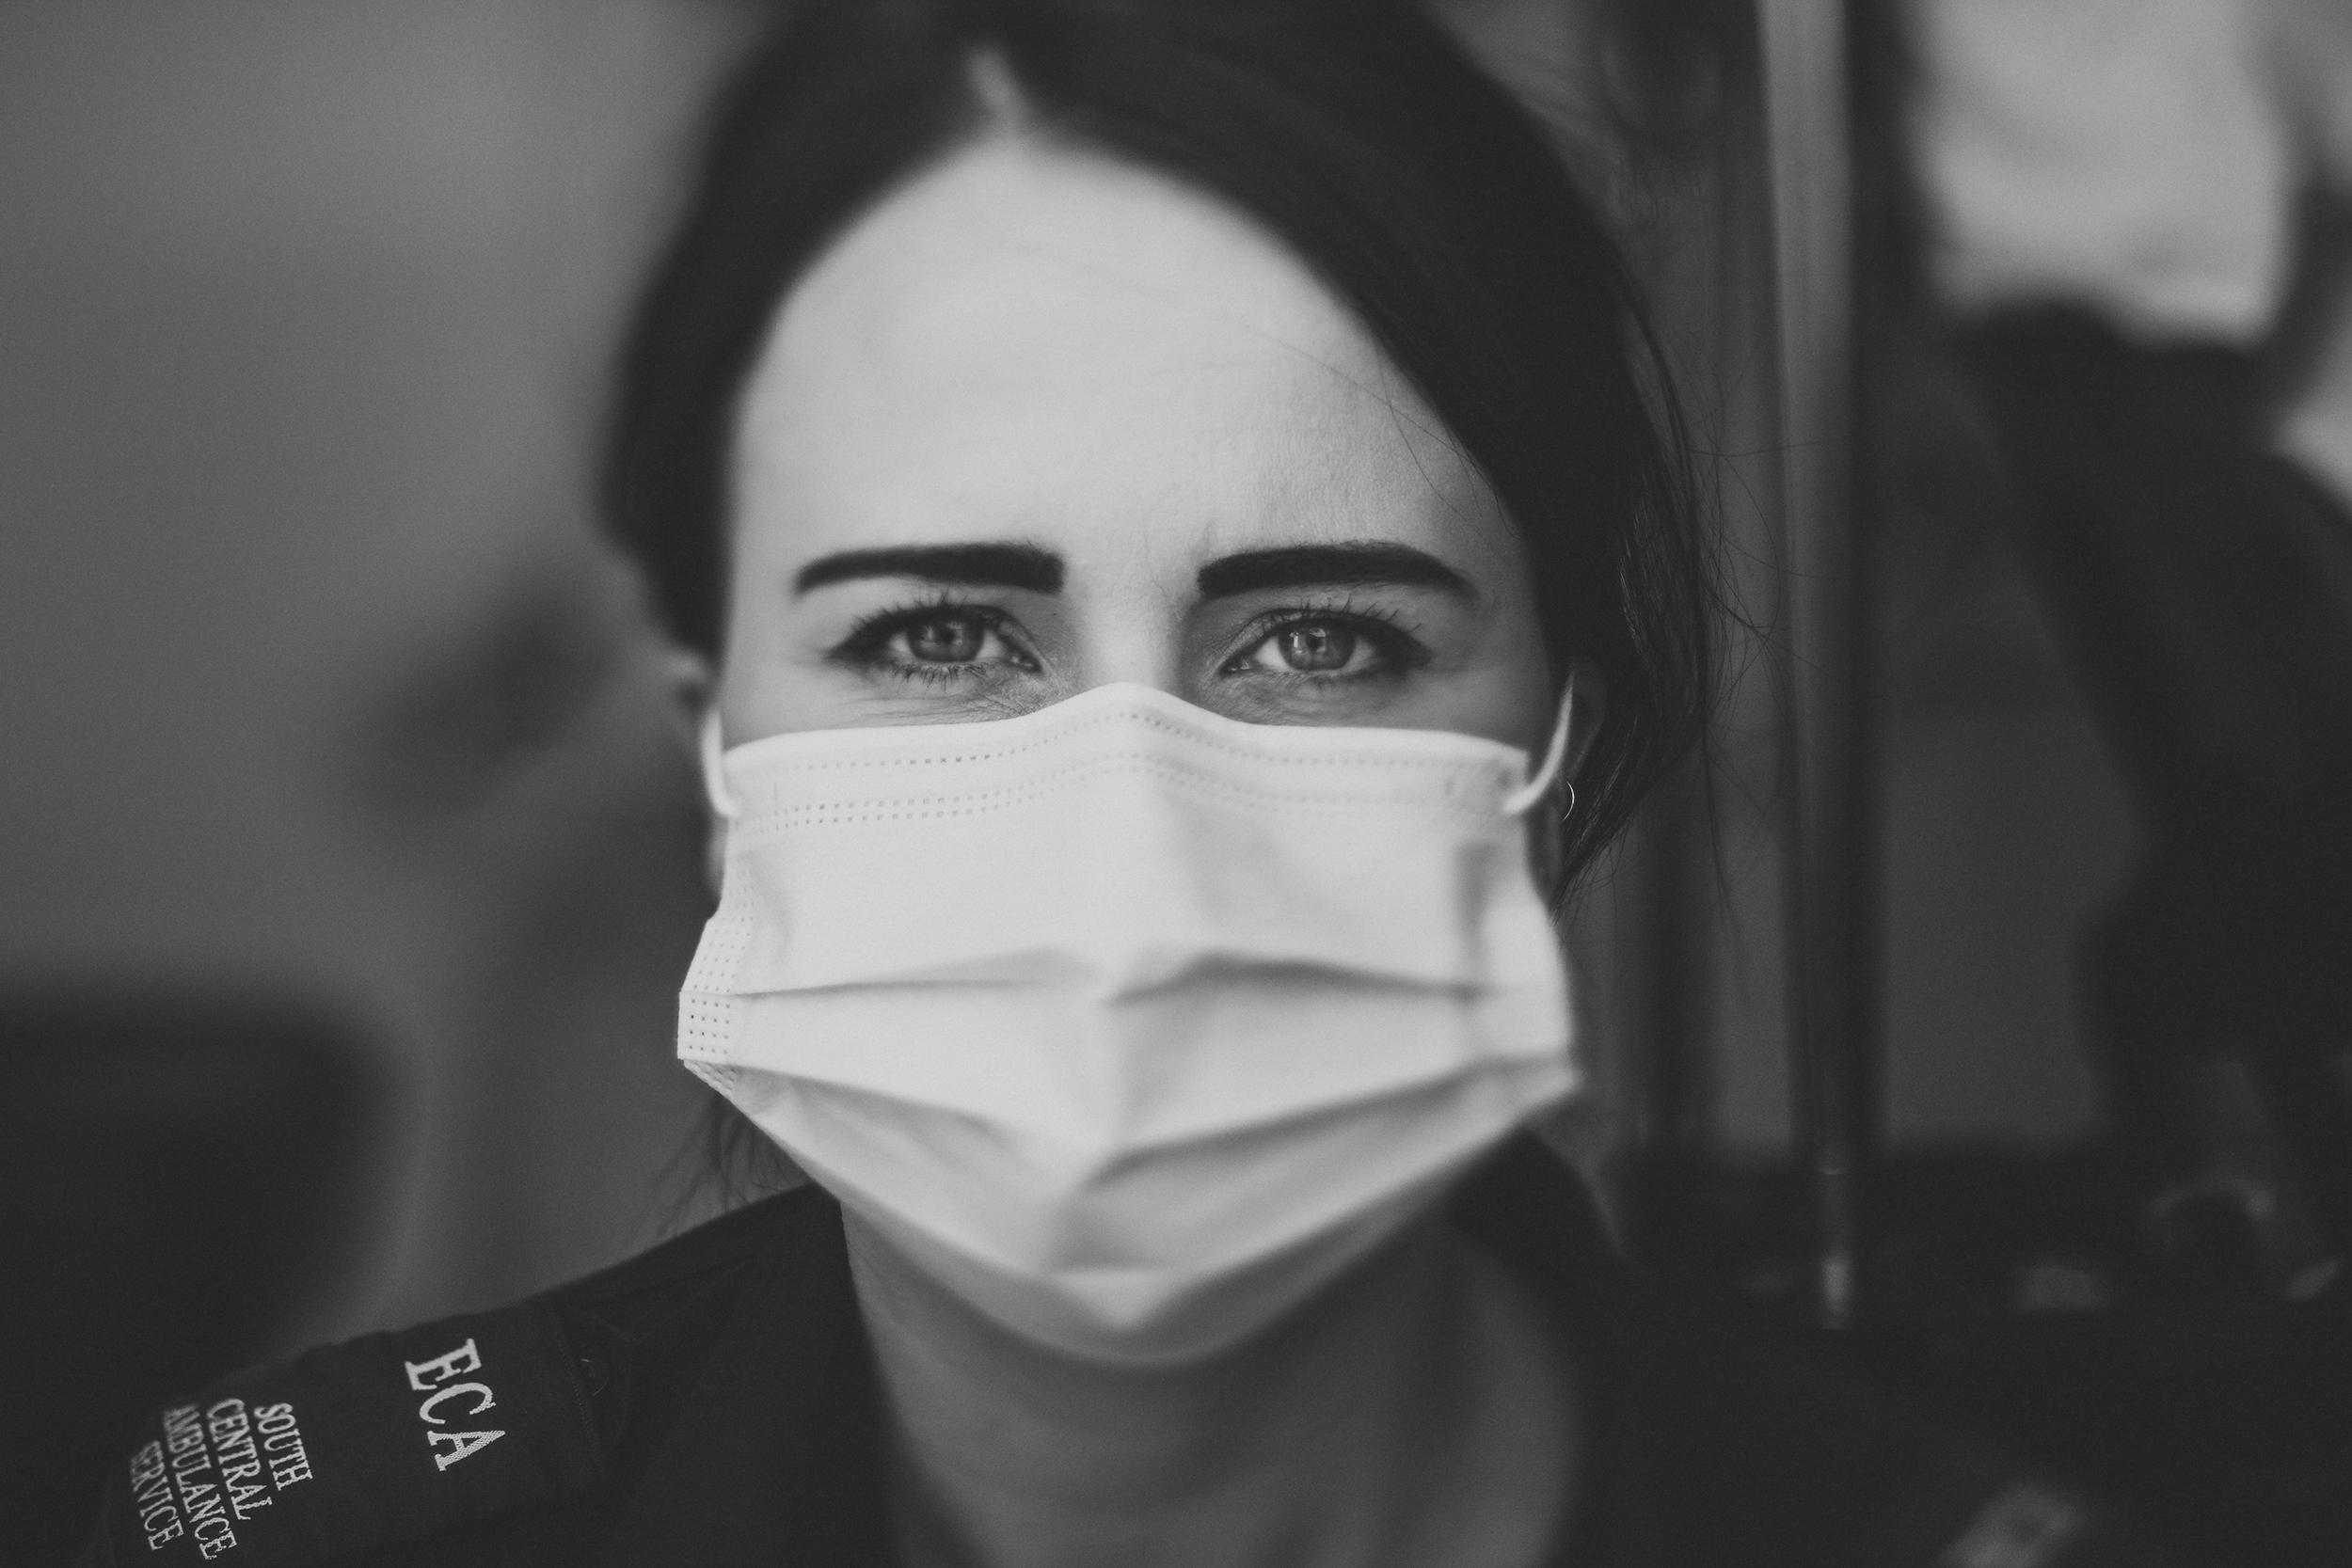 Female paramedic with mask looking directly a camera